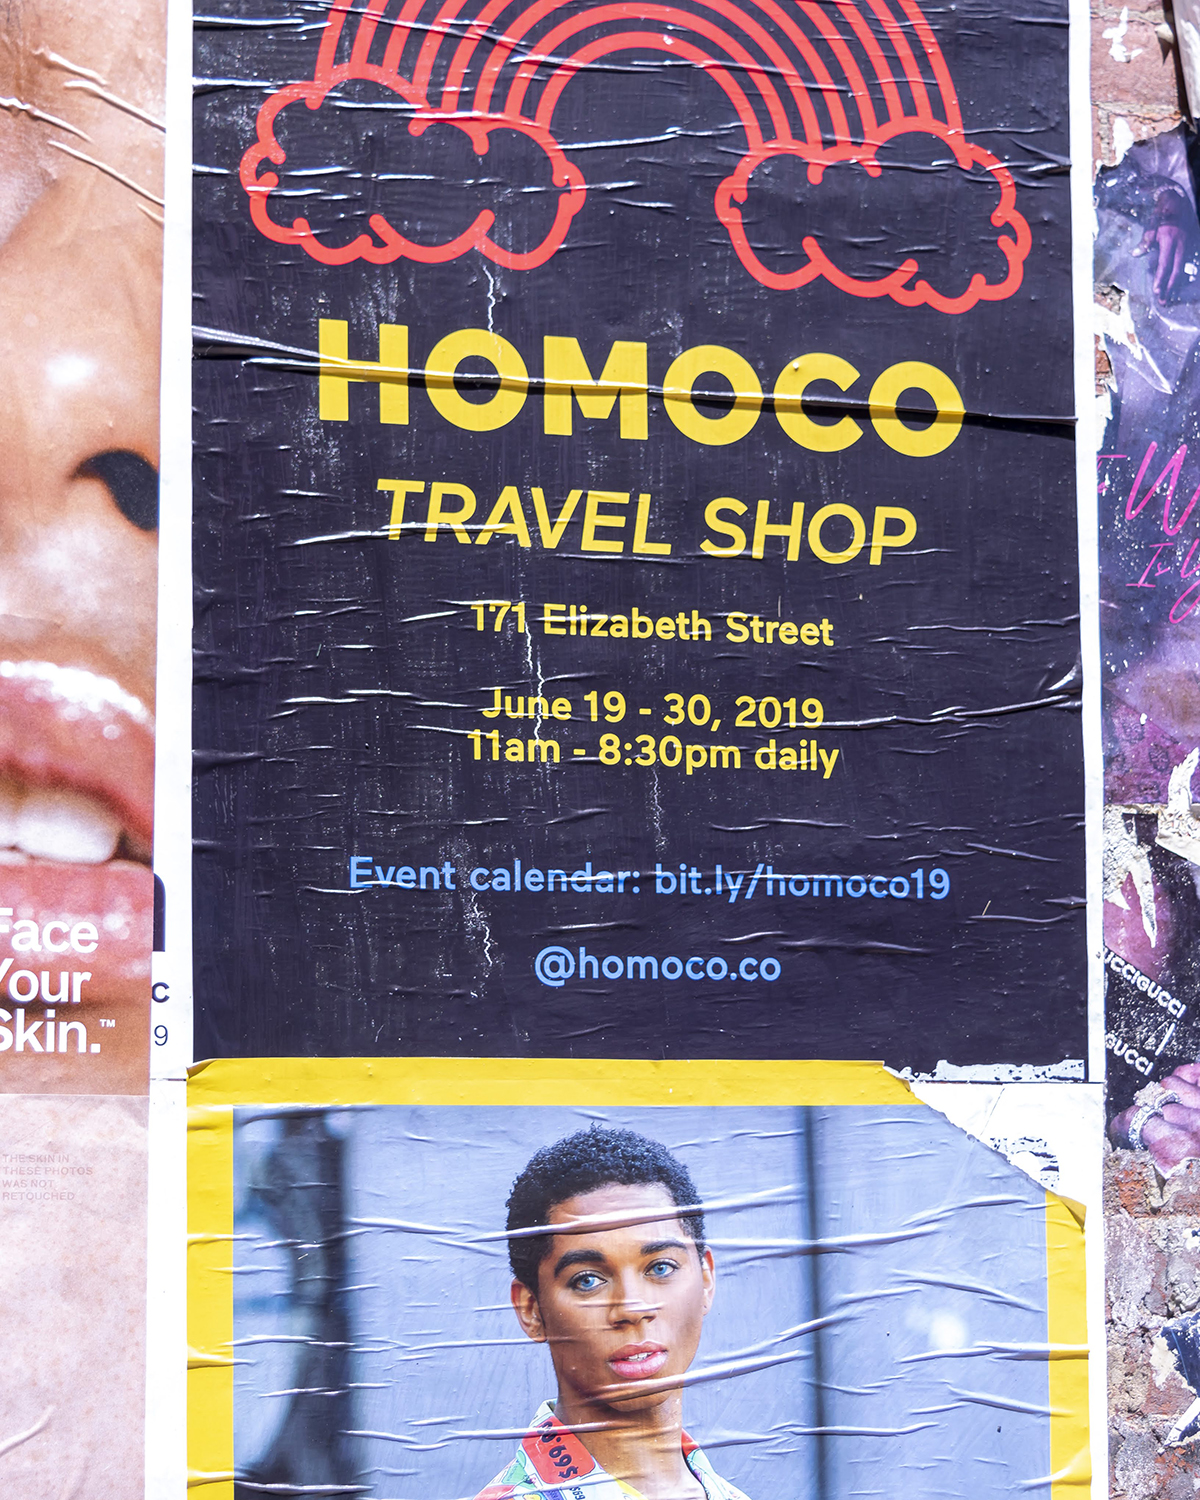 Poster advertising HOMOCO pop-up store